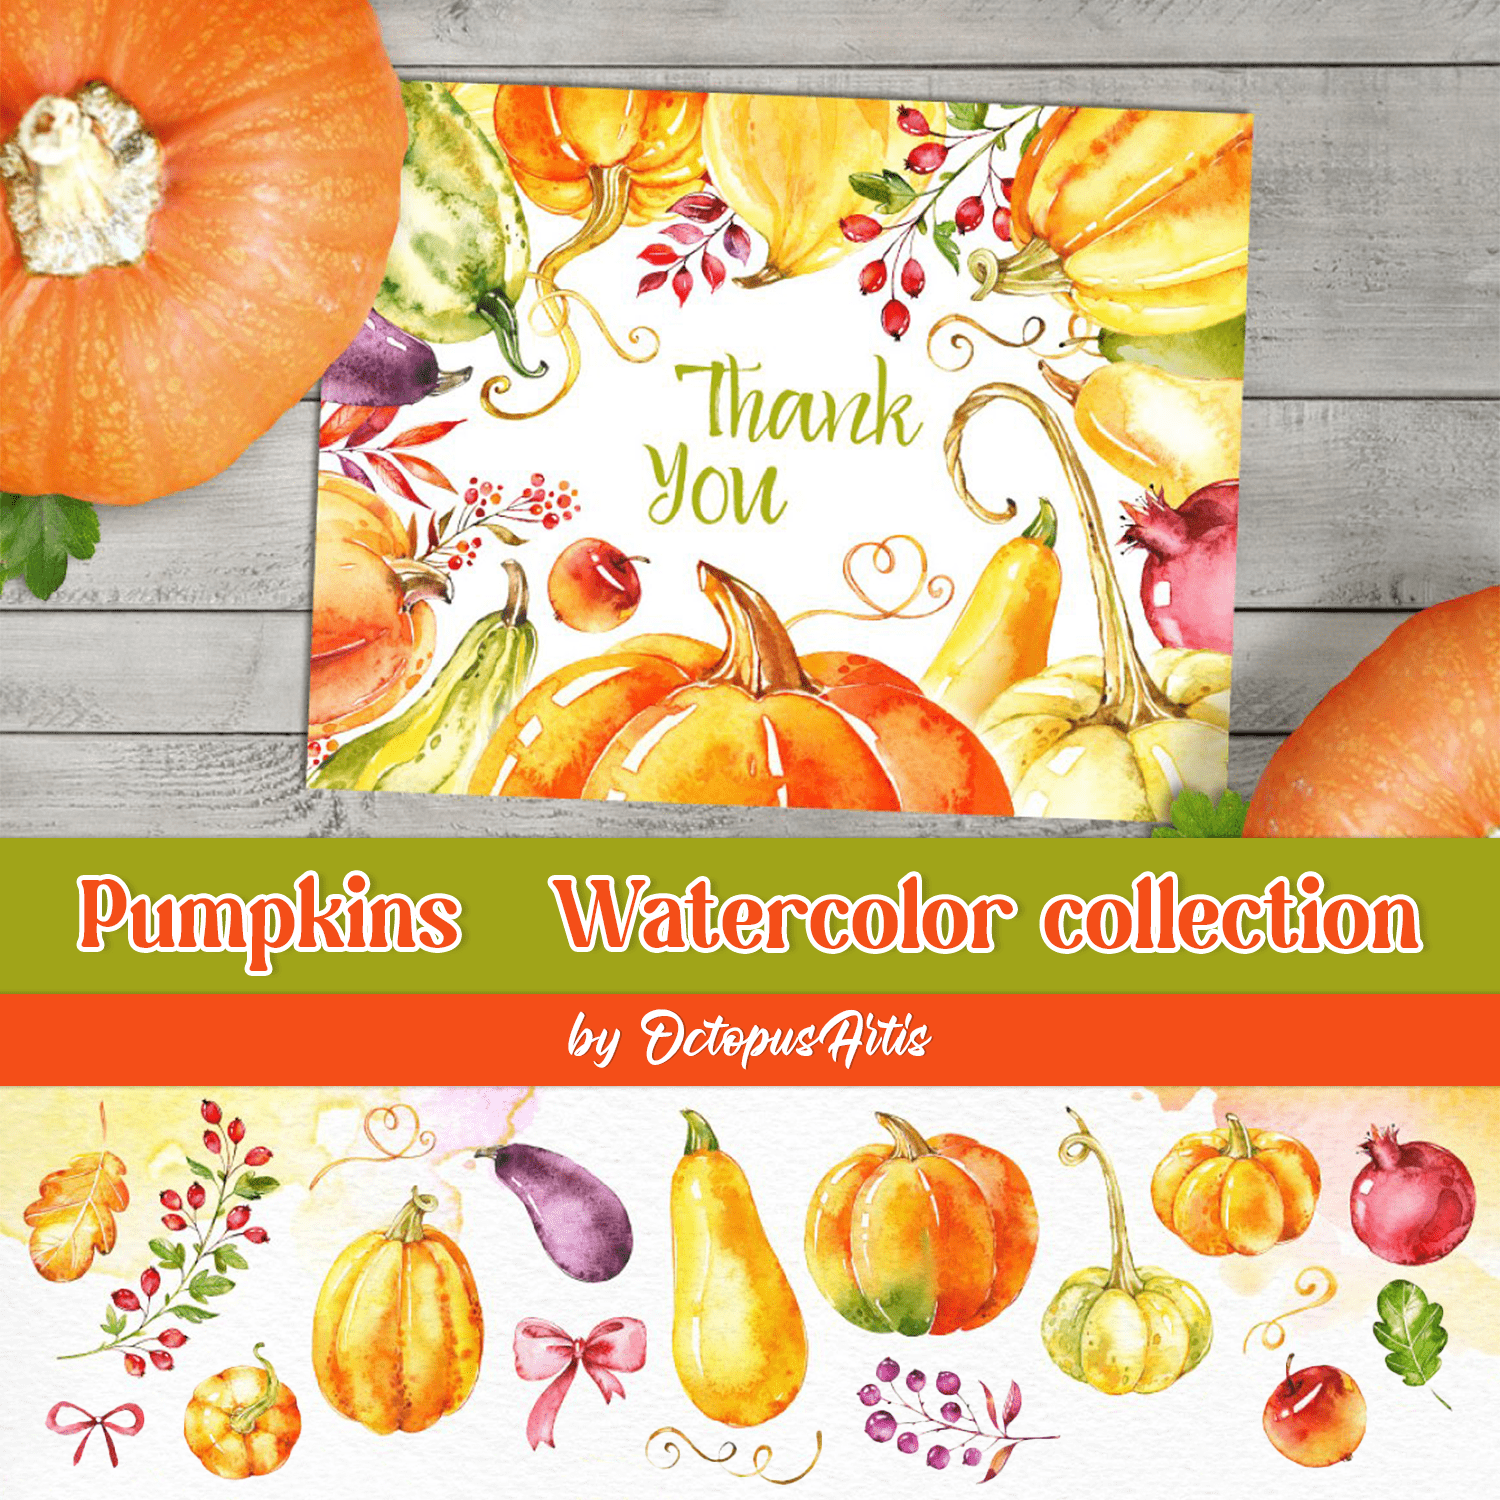 Pumpkins. Watercolor collection cover.